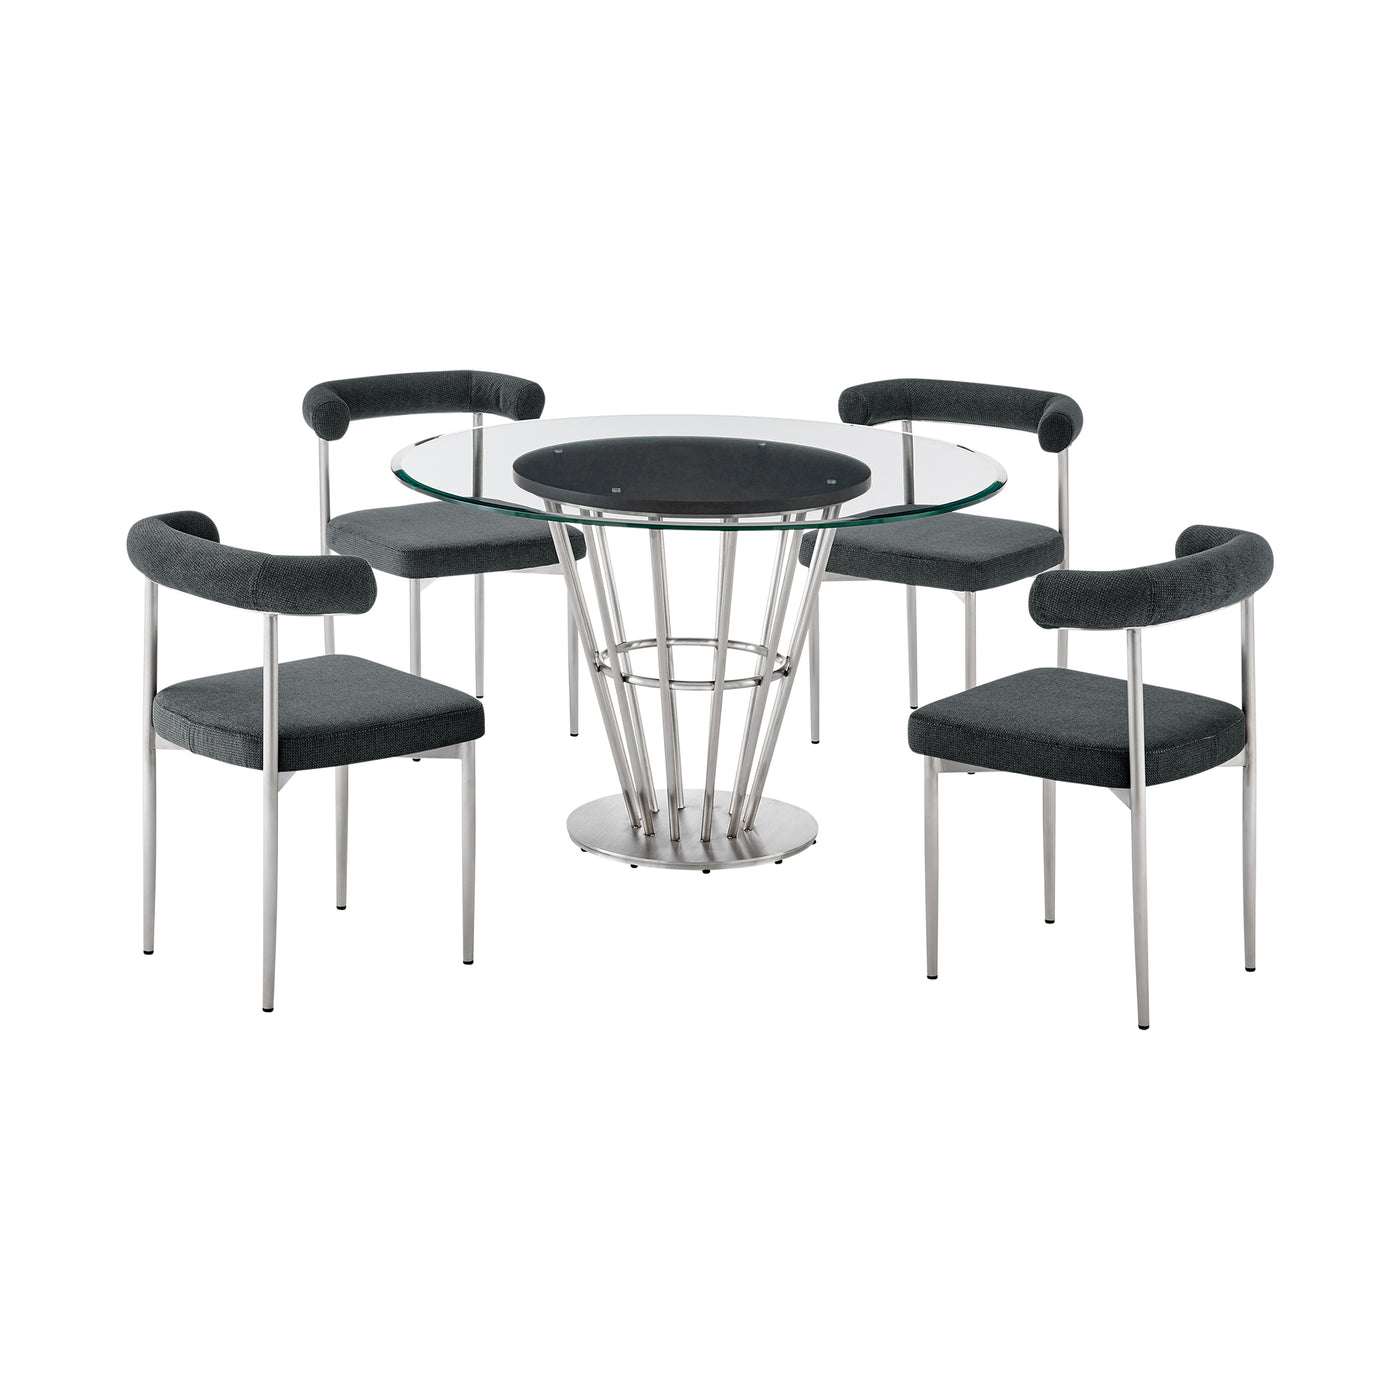 Veronica Shannon 5 Piece Dining Table Set